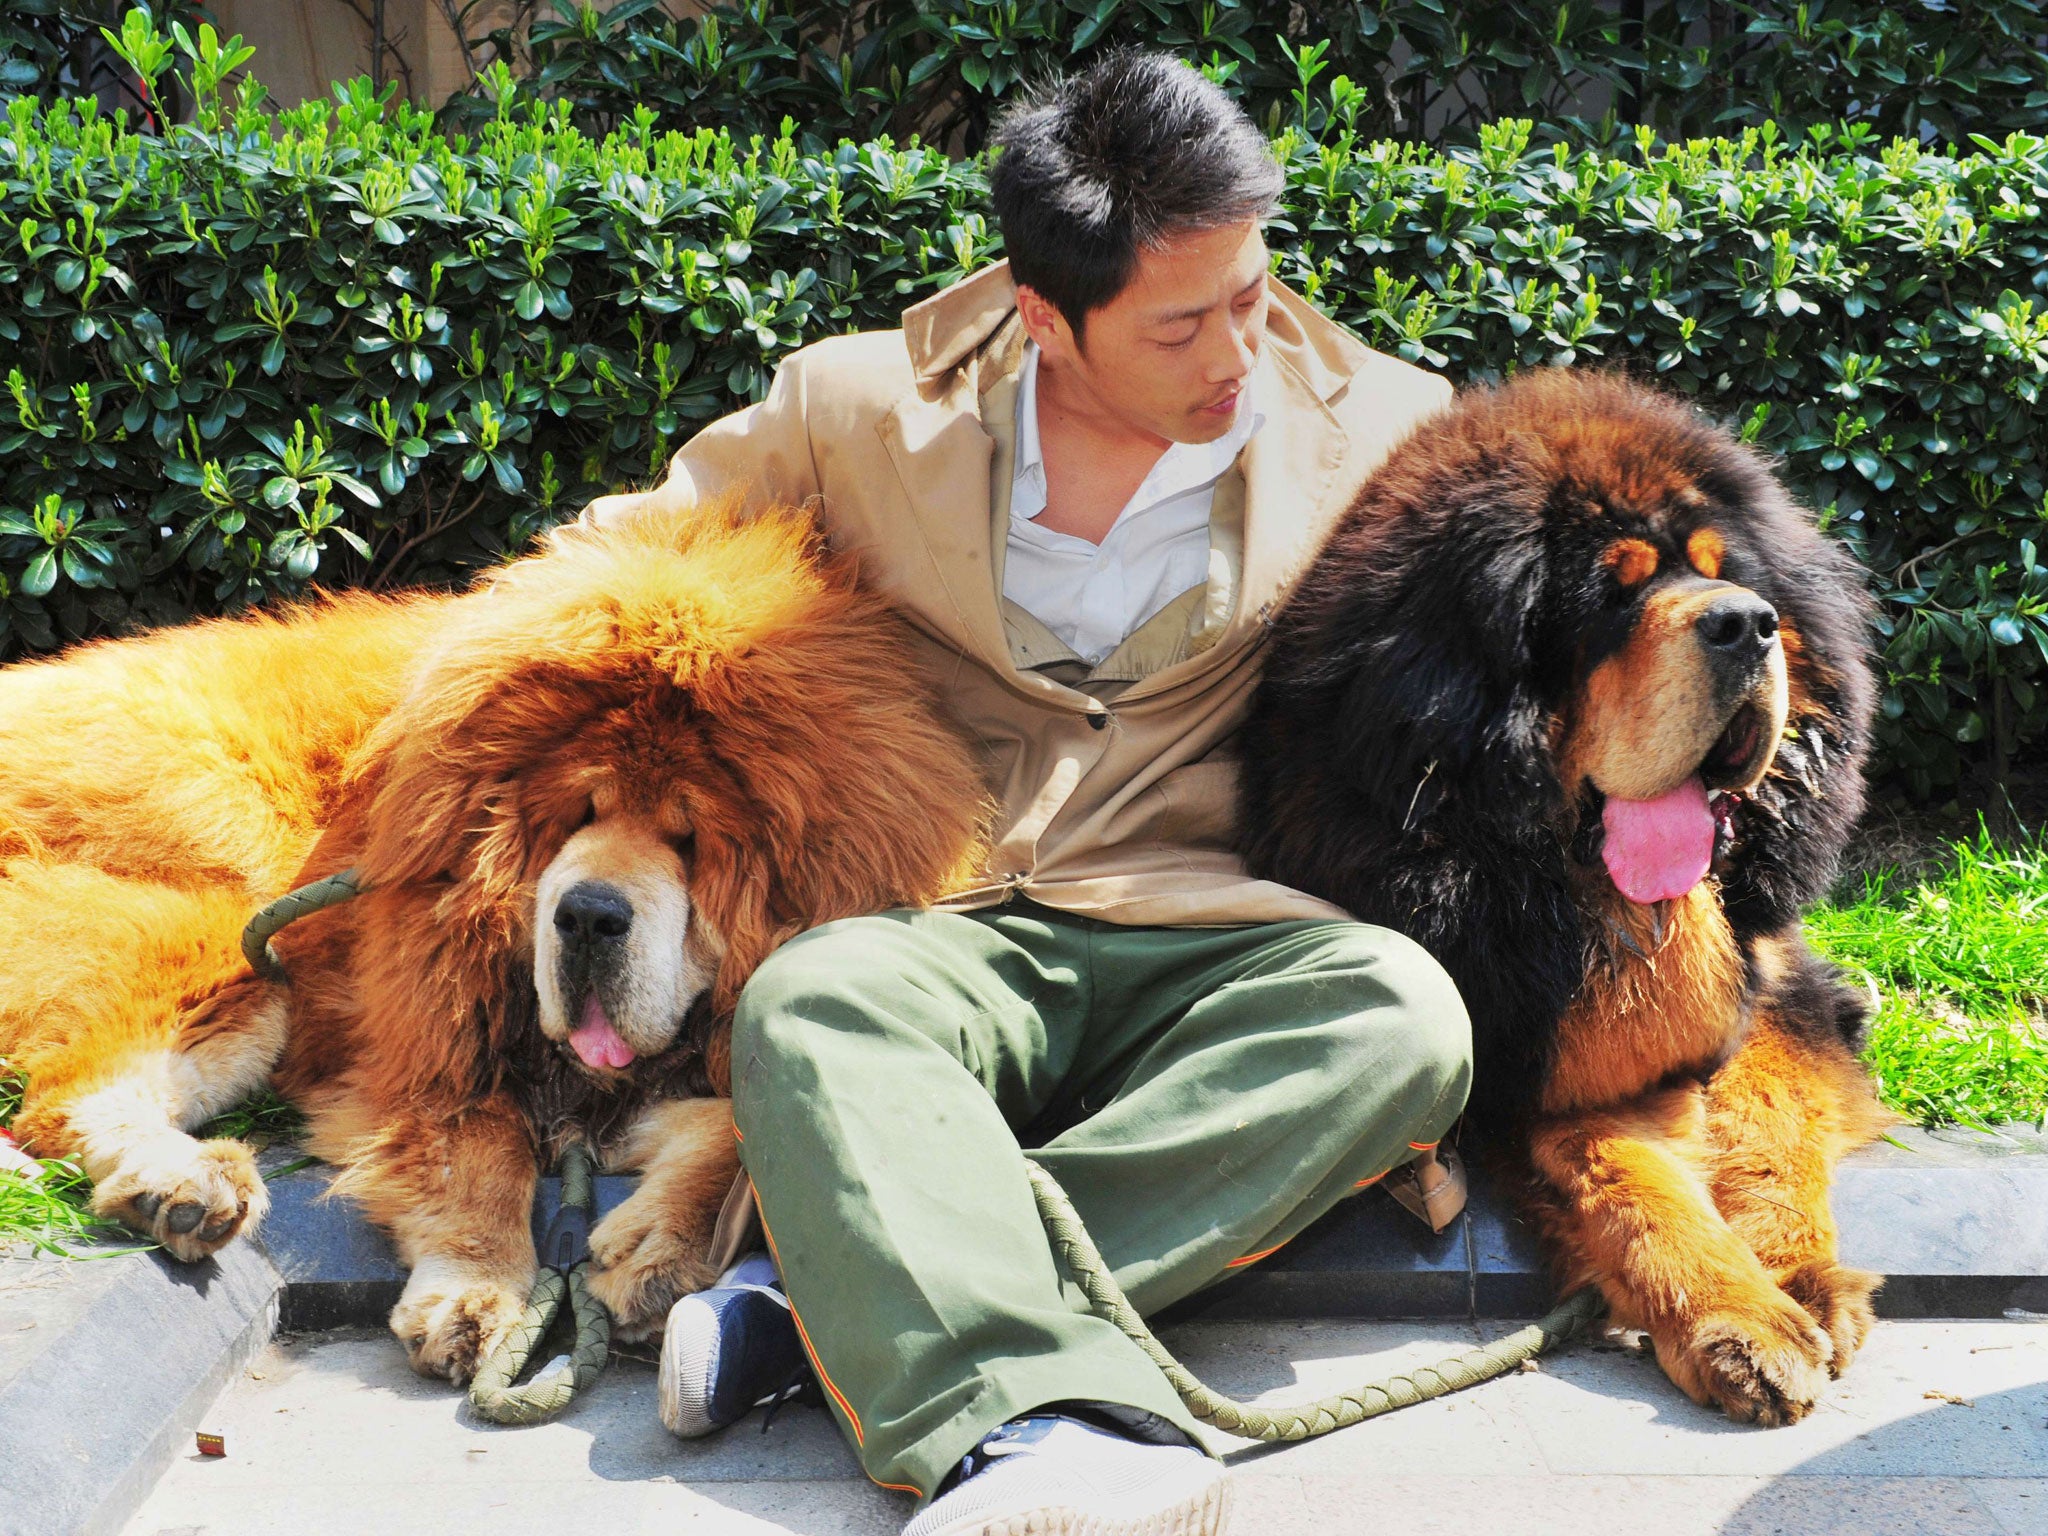 Shaggy Dog Story Were Two Tibetan Mastiffs Really Sold For 1 75m In China This Week The Independent The Independent